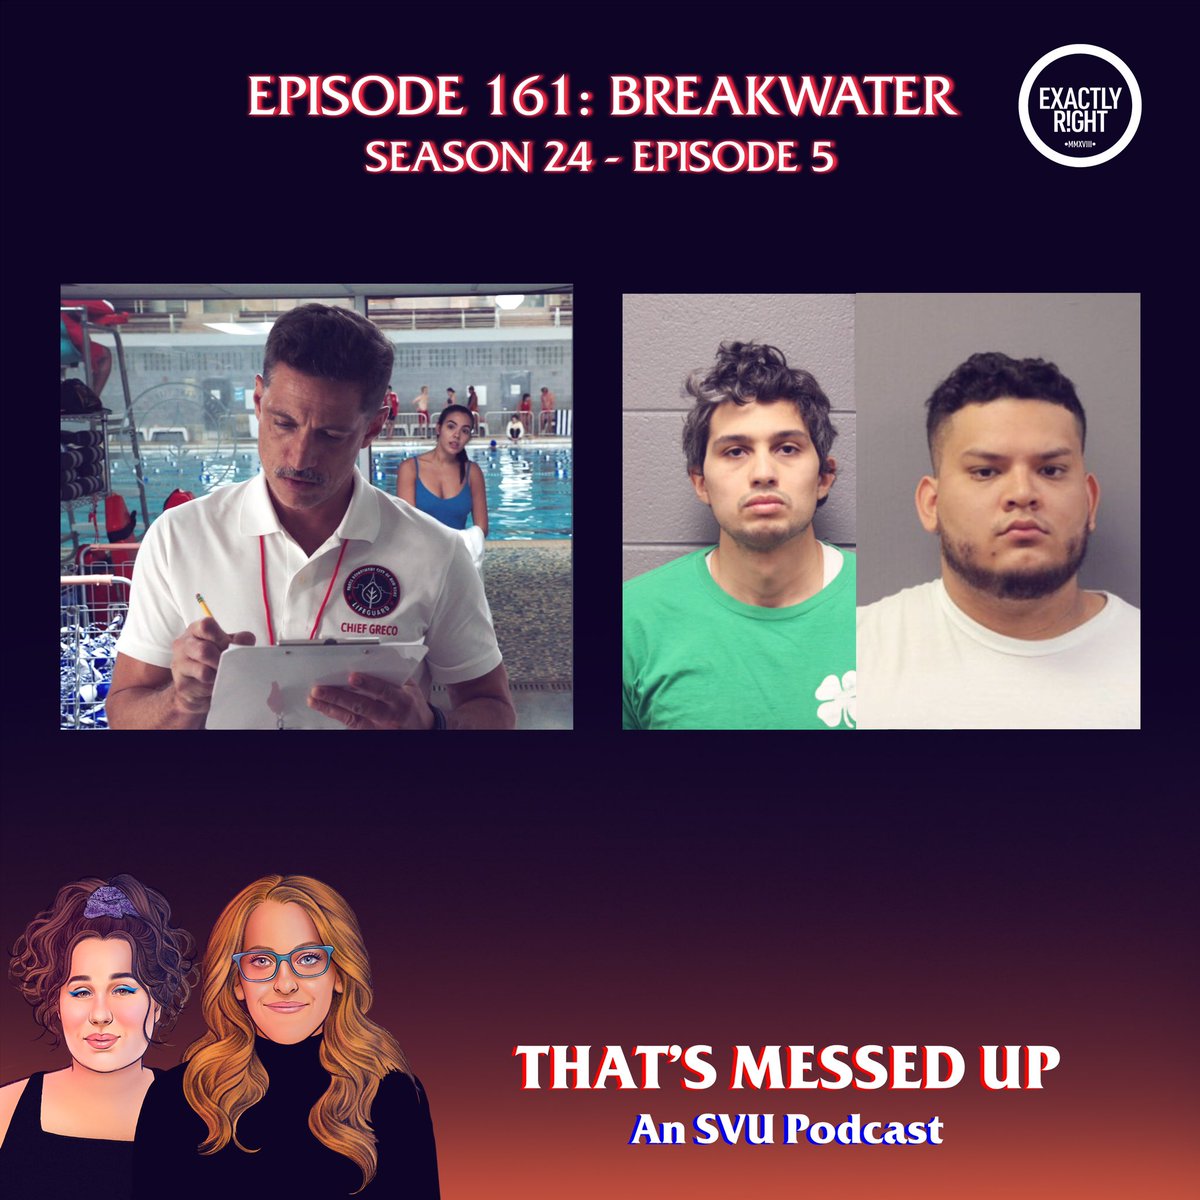 NEW EPISODE - Episode 161 “Breakwater” is up on @exactlyright! Happy 2024 everyone! Enjoy our first episode from the 24th season about… THE MOST POWERFUL LIFEGUARD IN NEW YORK! Listen on @applepodcasts podcasts.apple.com/us/podcast/tha… or @spotifypodcasts or wherever you pod! #svu #dundun